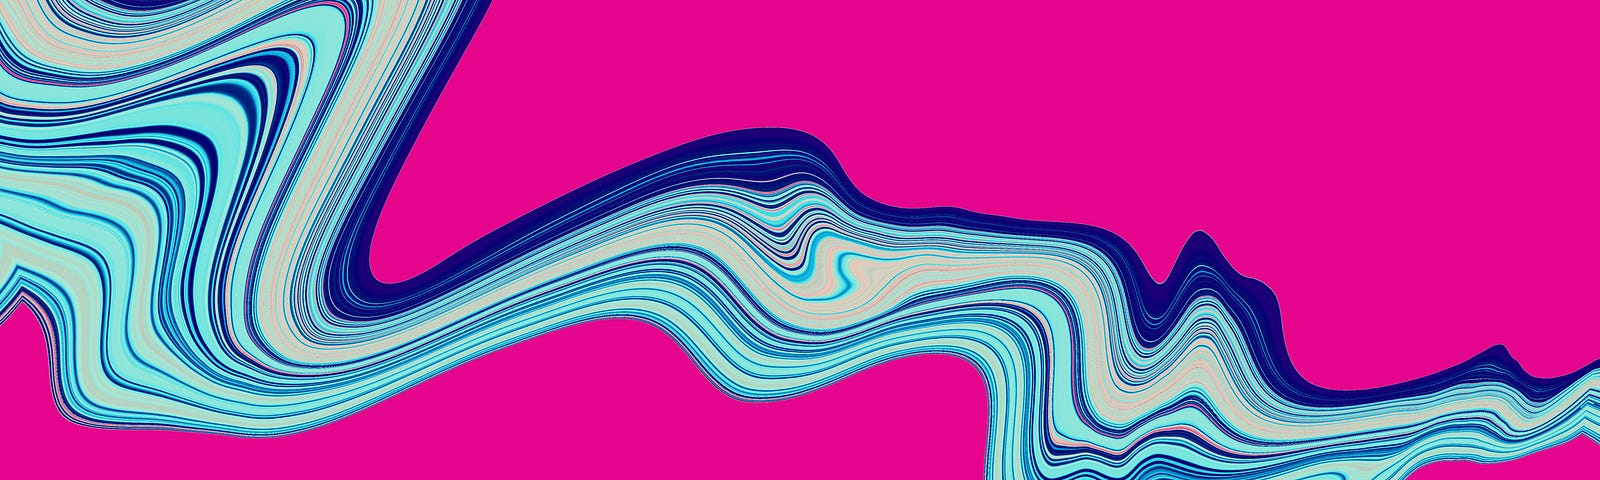 Abstract blue wave fractal on isolated magenta background for creative design.